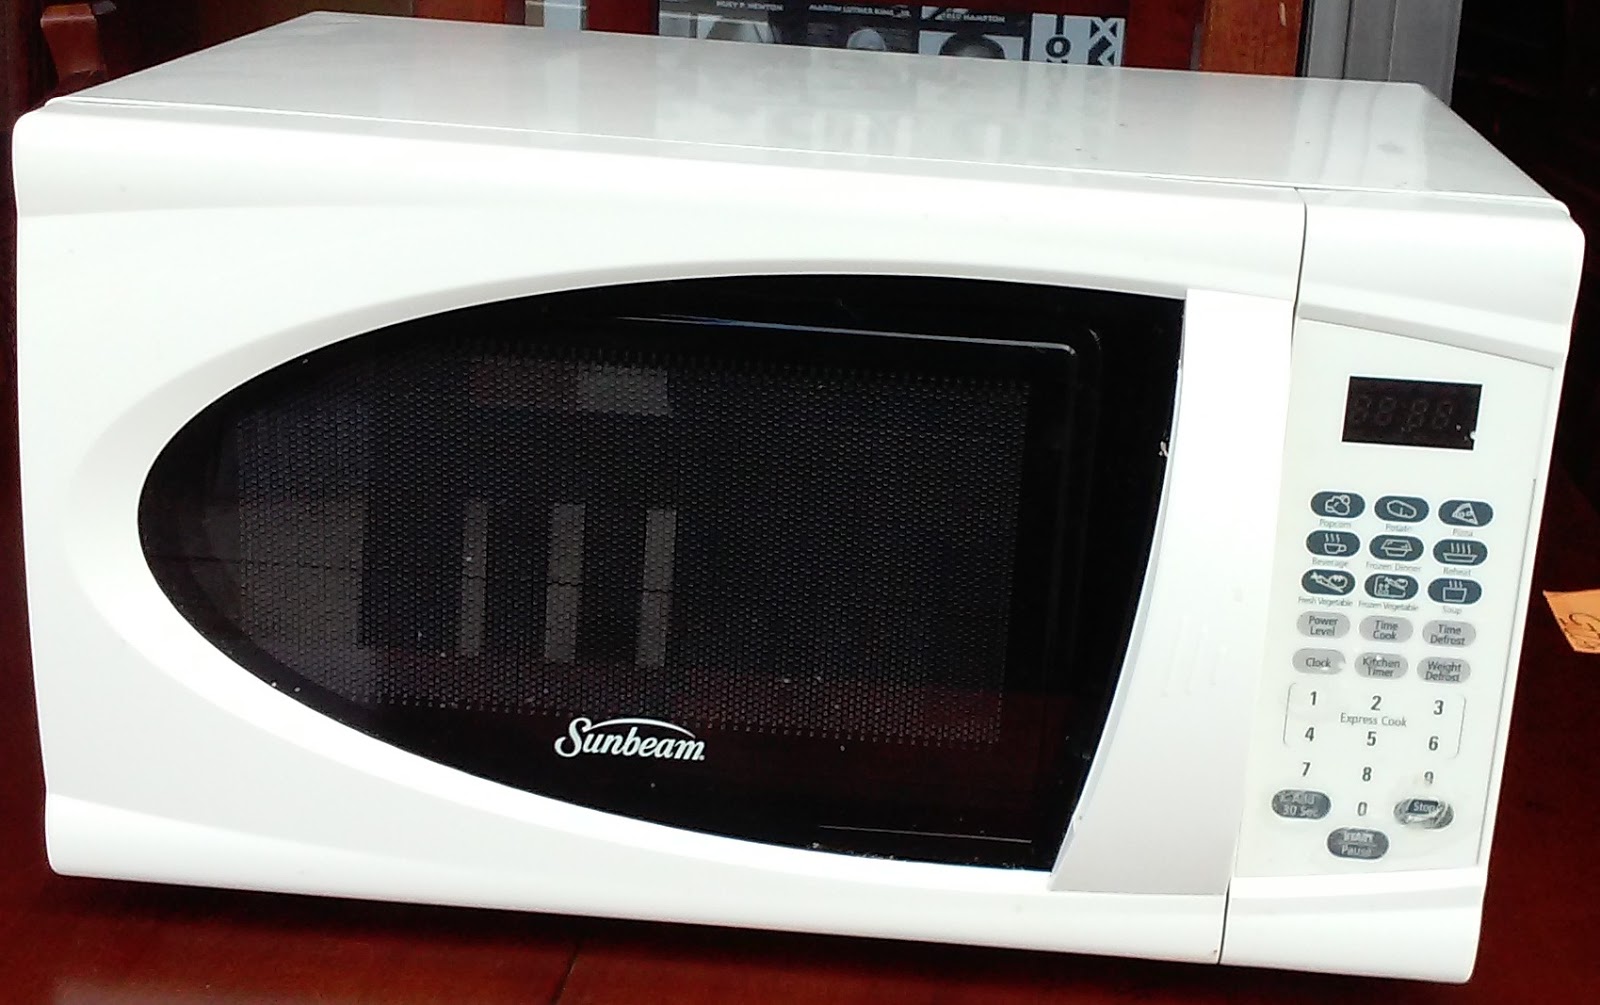 UHURU FURNITURE & COLLECTIBLES: SOLD Sunbeam Microwave with Manual - $25